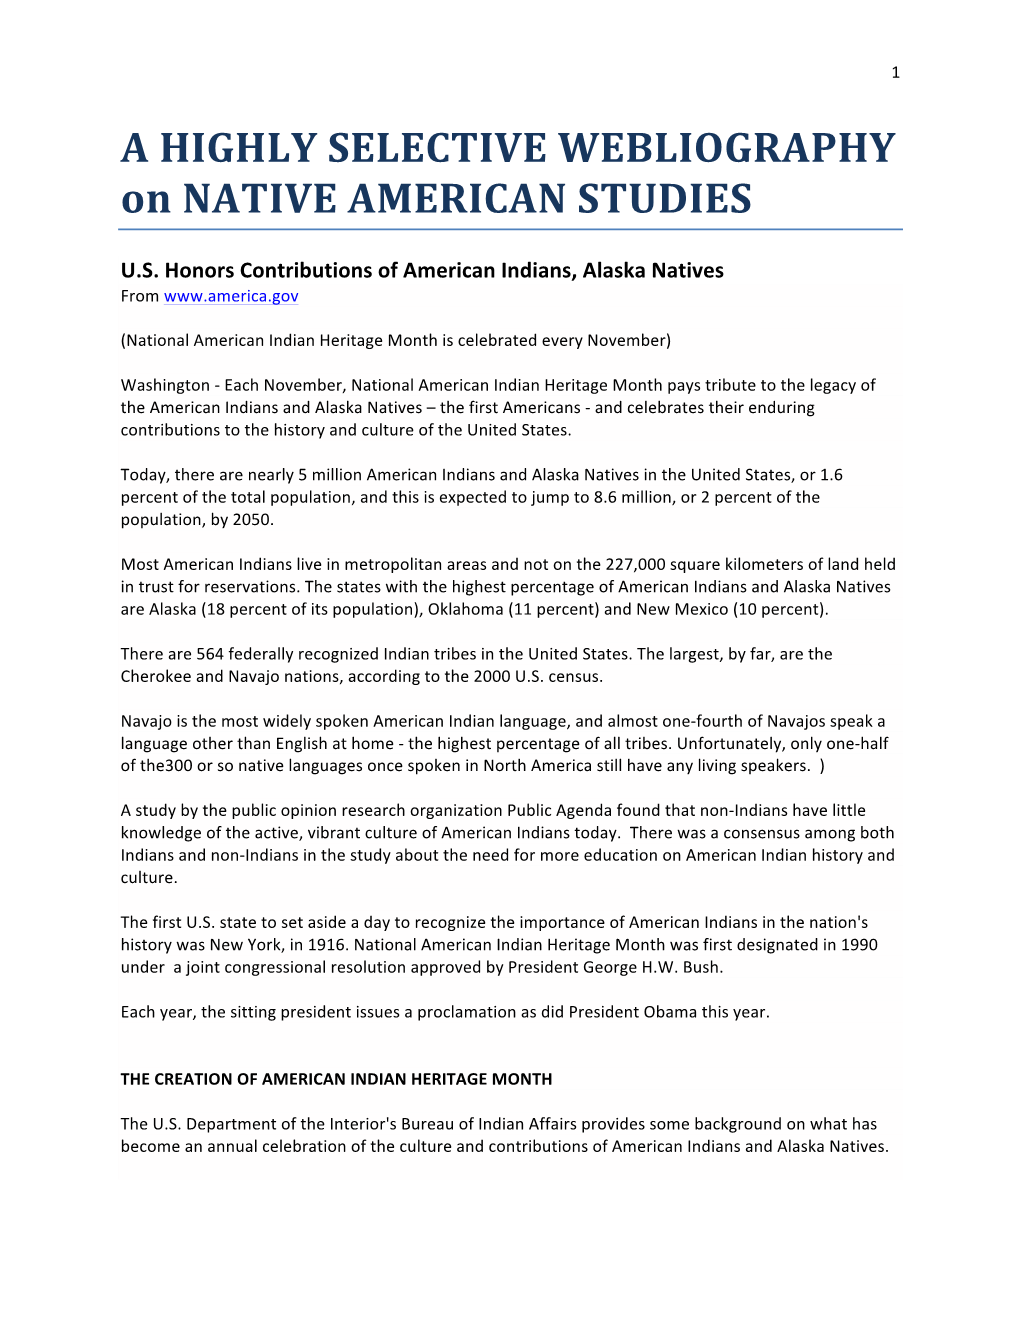 A HIGHLY SELECTIVE WEBLIOGRAPHY on NATIVE AMERICAN STUDIES